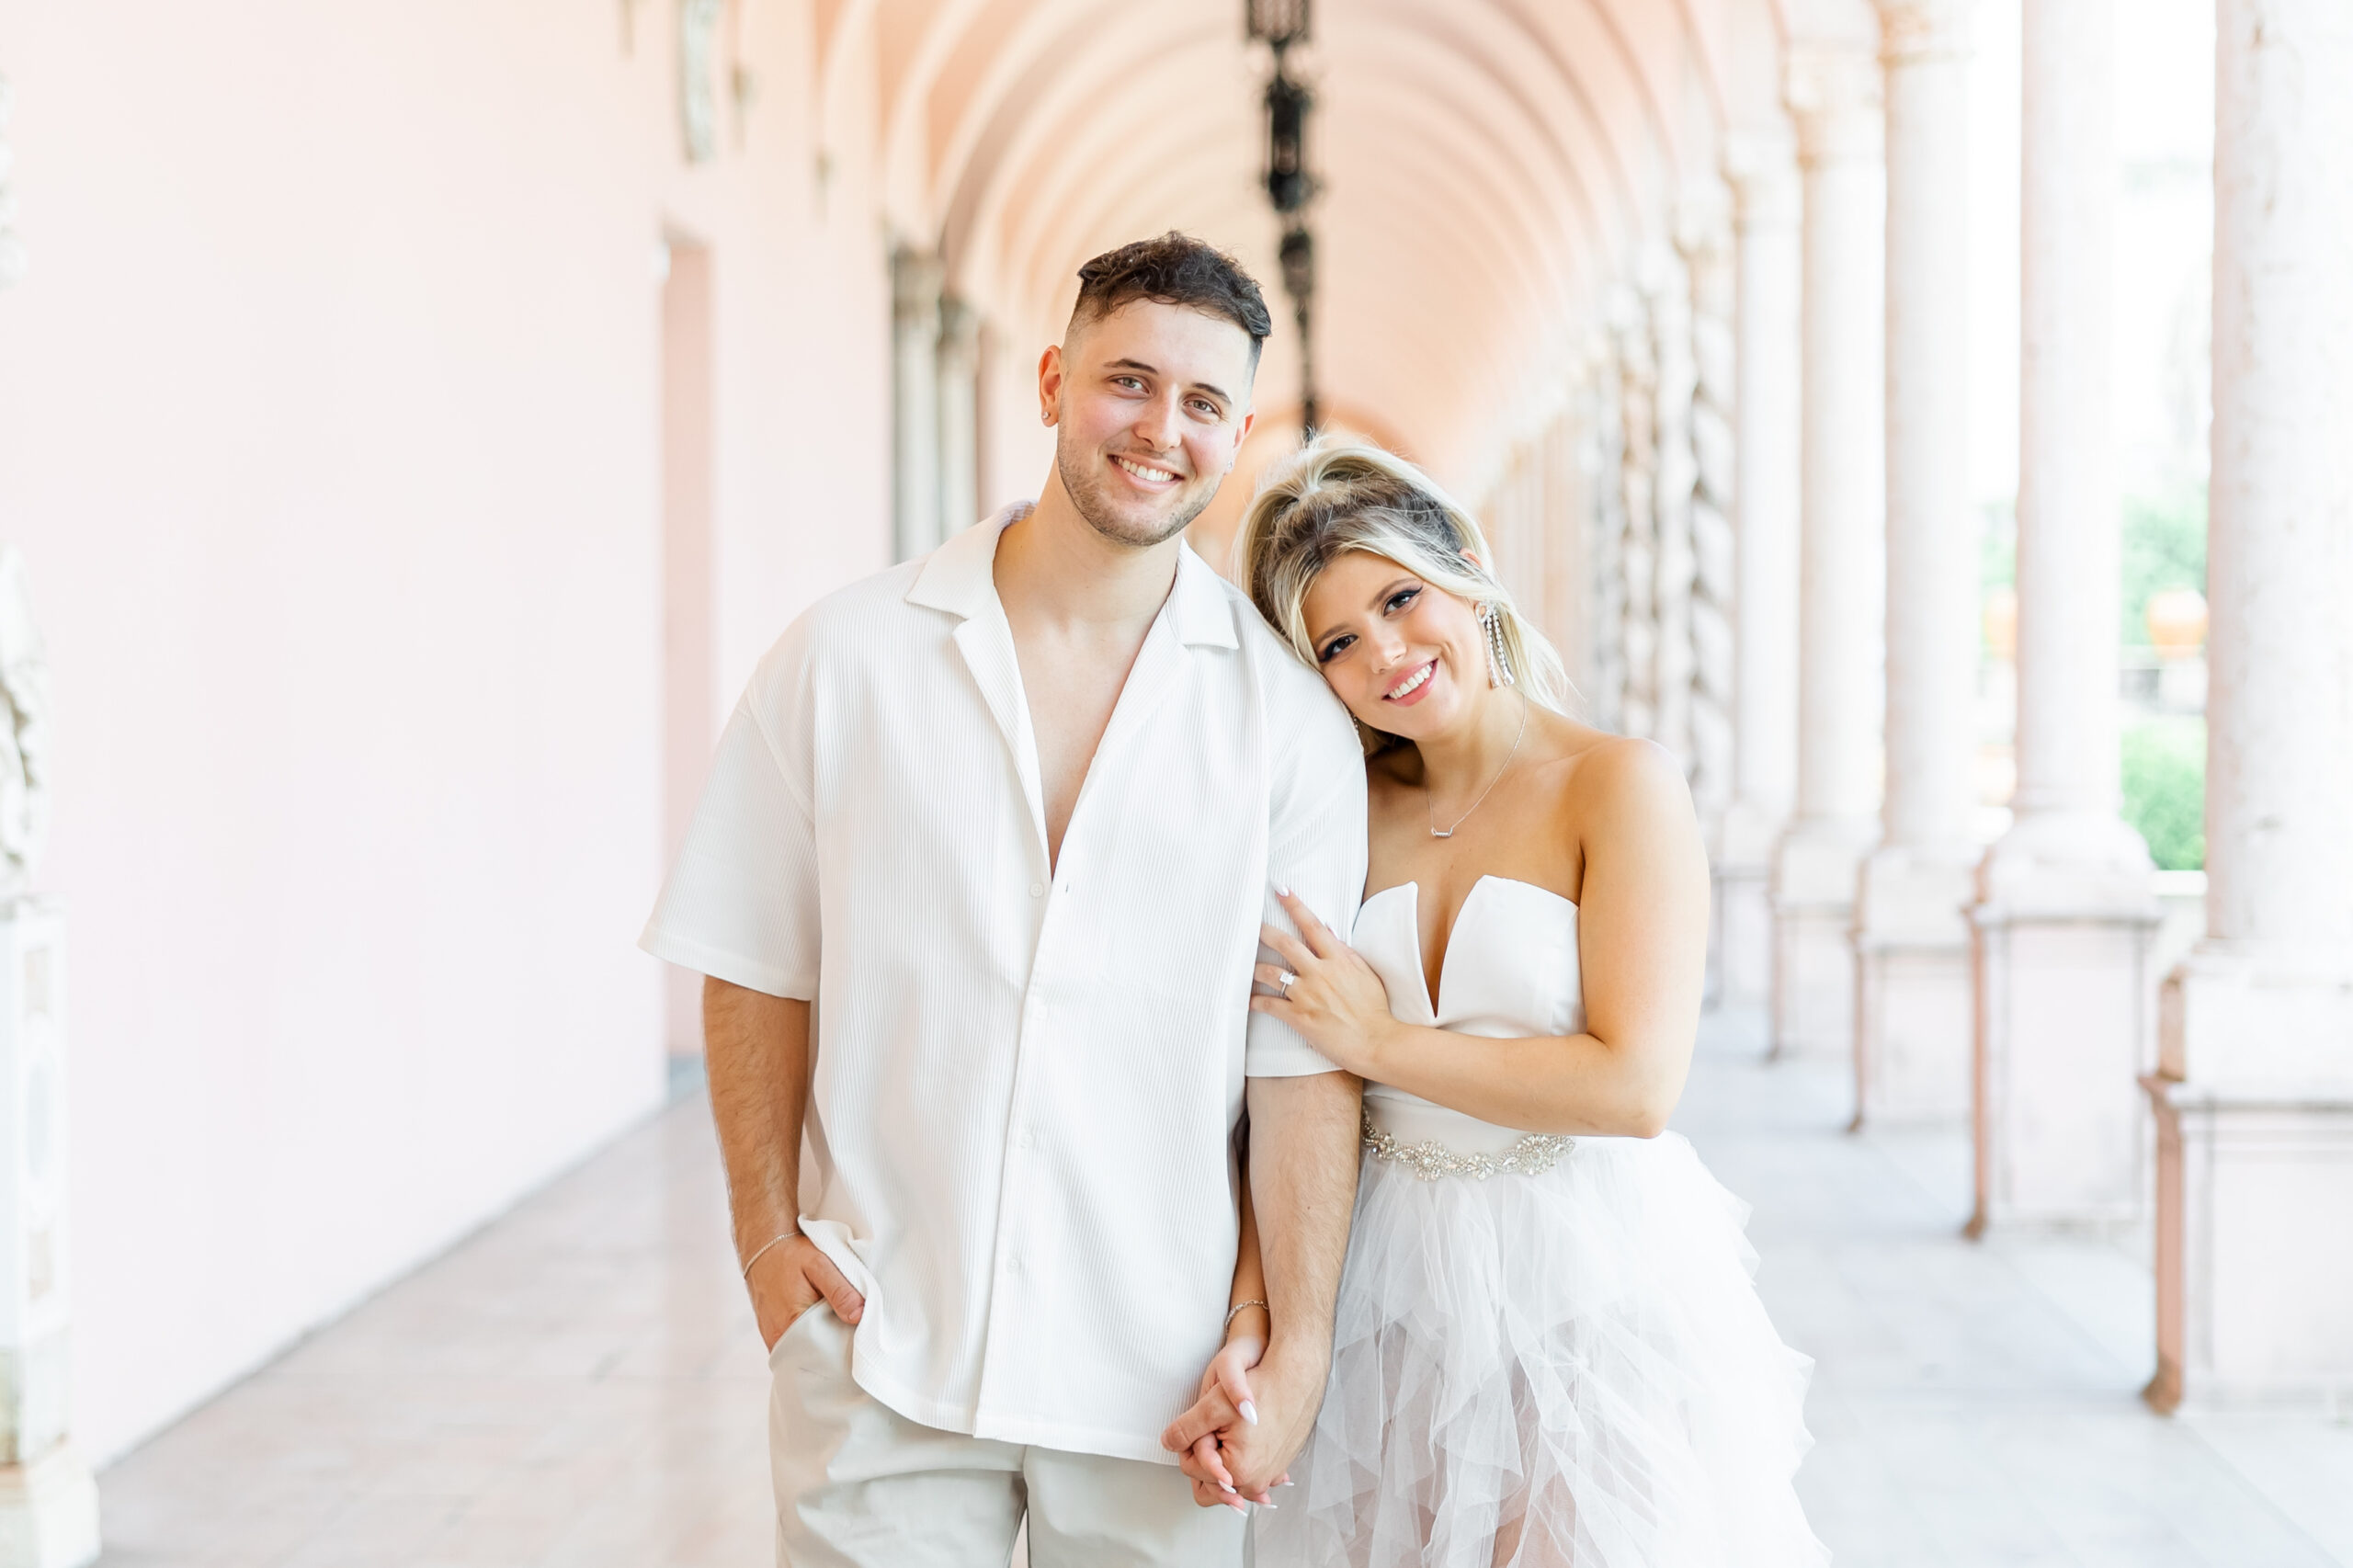 Luxury engagement session at The Ringling Museum in Sarasota, Florida